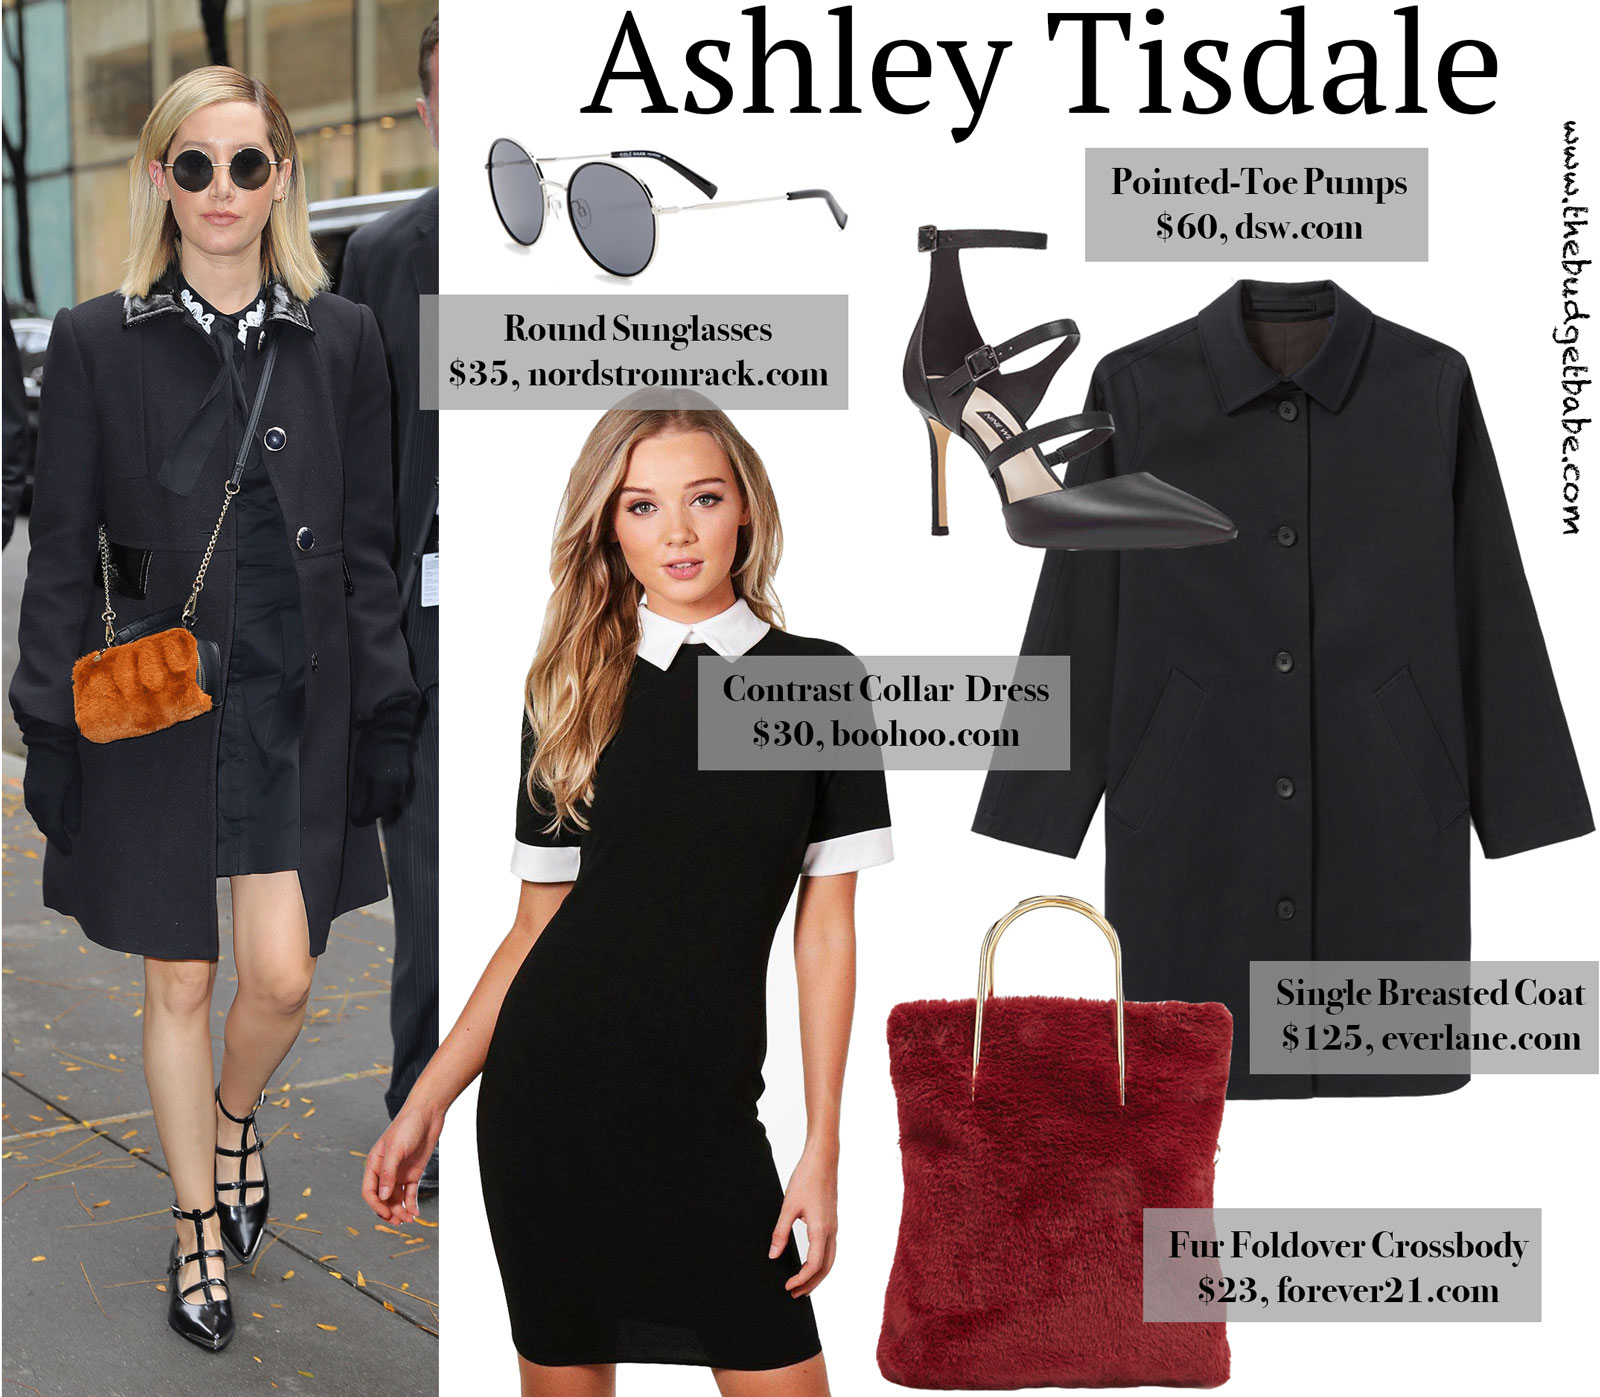 Ashley Tisdale Black Coat and Caged Heels Look for Less